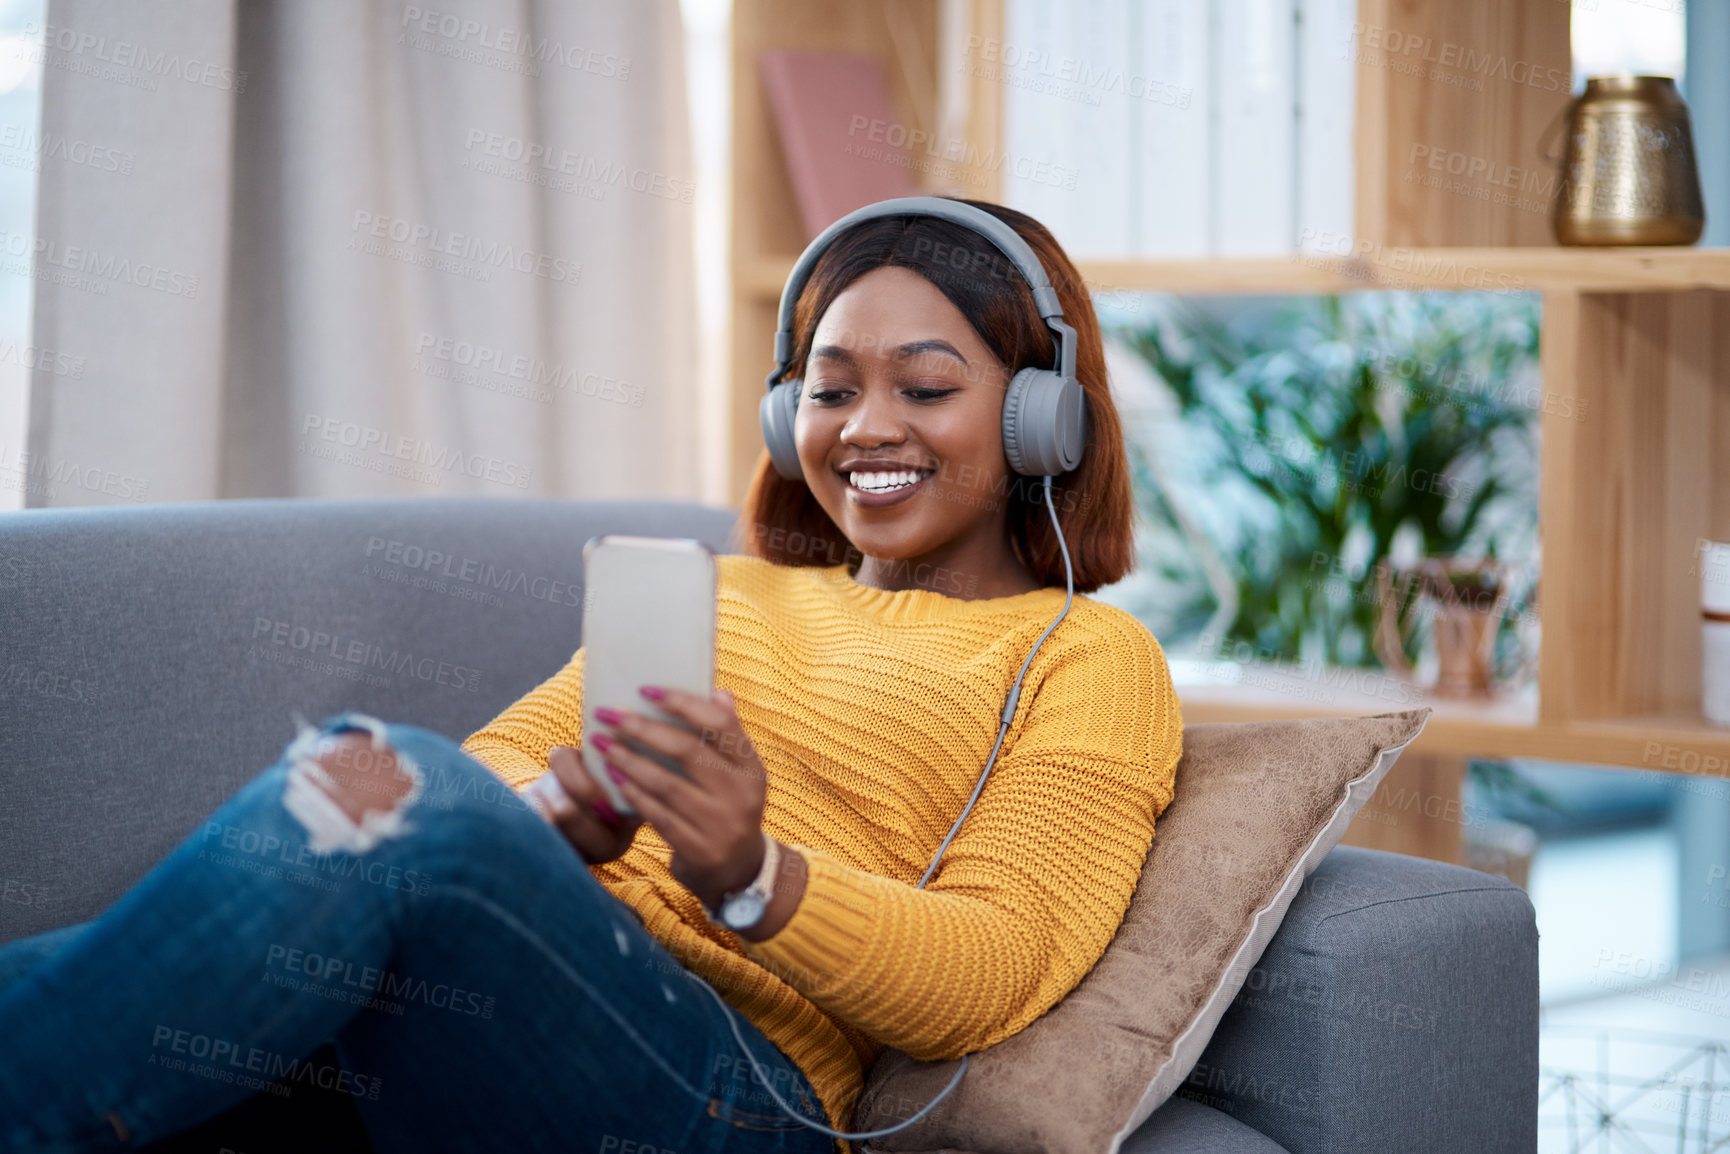 Buy stock photo Relax, phone and music with a black woman on a sofa in the living room of her home streaming audio through headphones. Mobile, freedom and time off with a happy young female listening to the radio